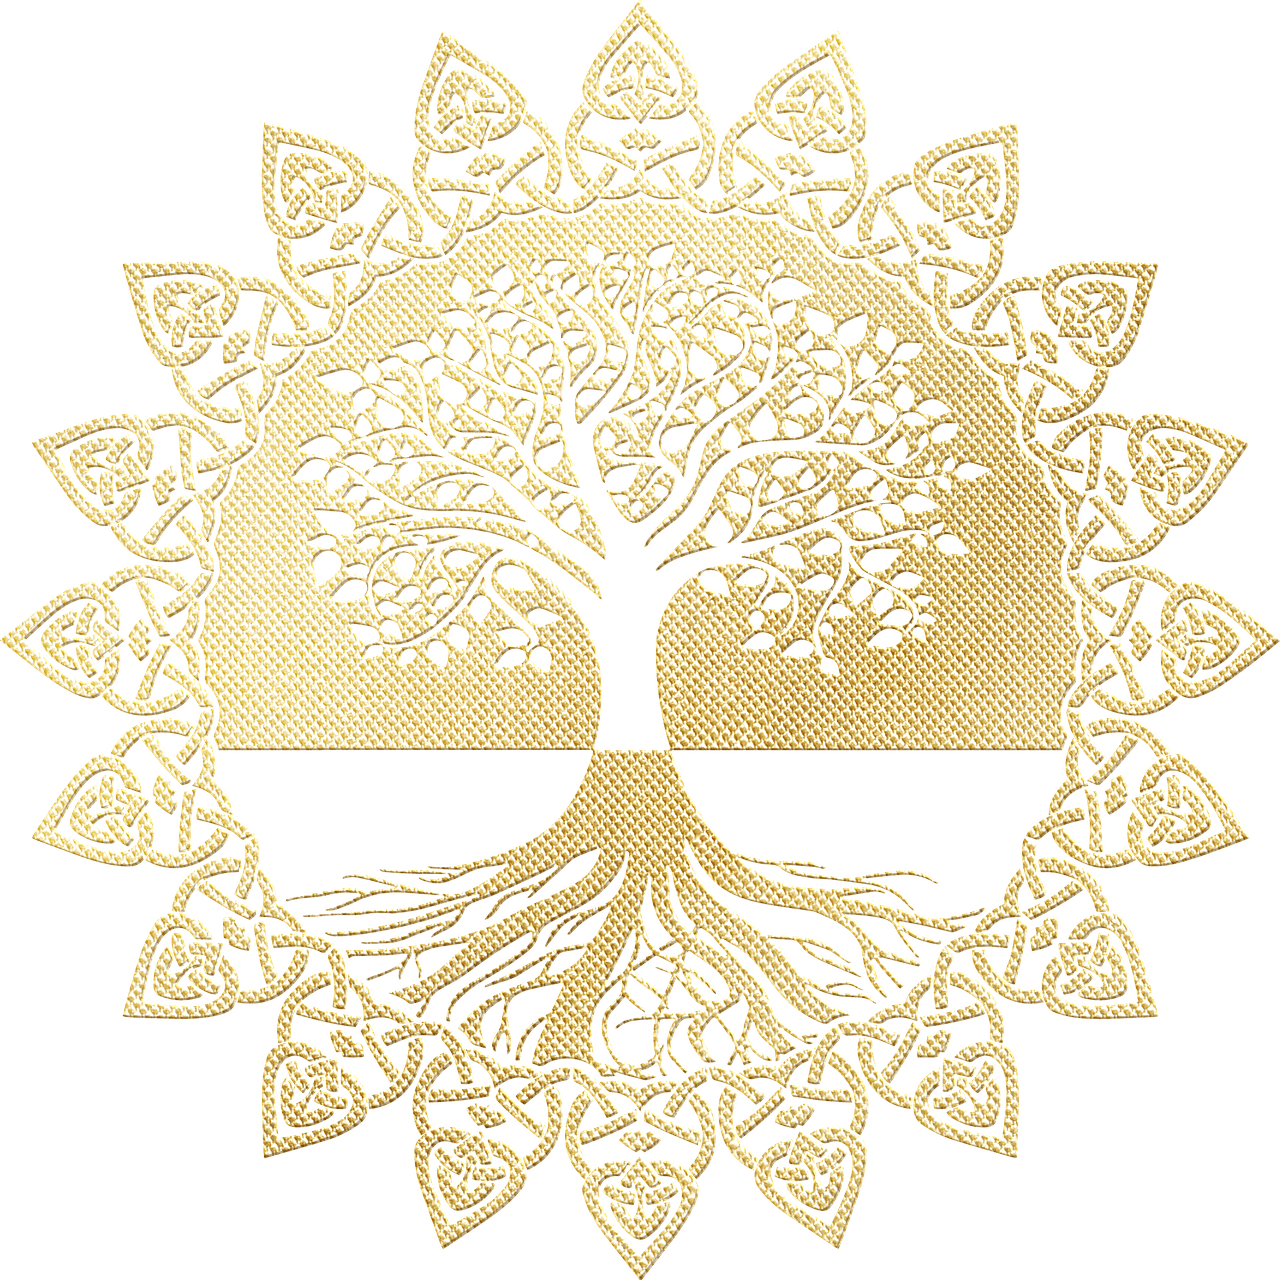 Gold Foil Tree Of Life - AnnaliseArt / Pixabay - Ceili at the Roundhouse Celtic Festival